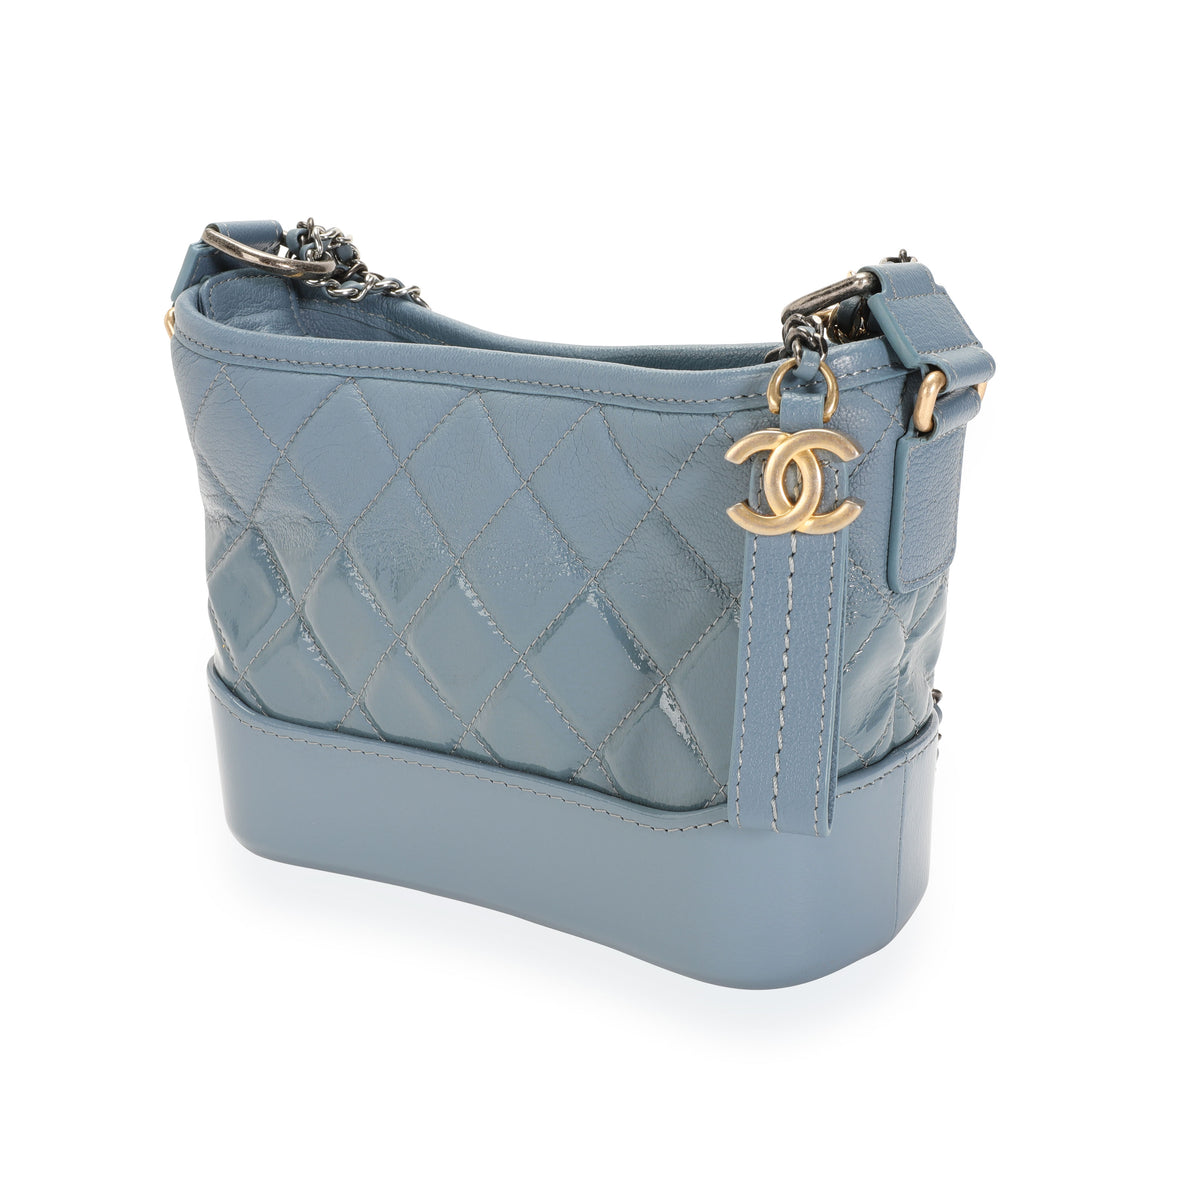 Chanel Blue Ombré Quilted Patent Leather & Aged Calfskin Small